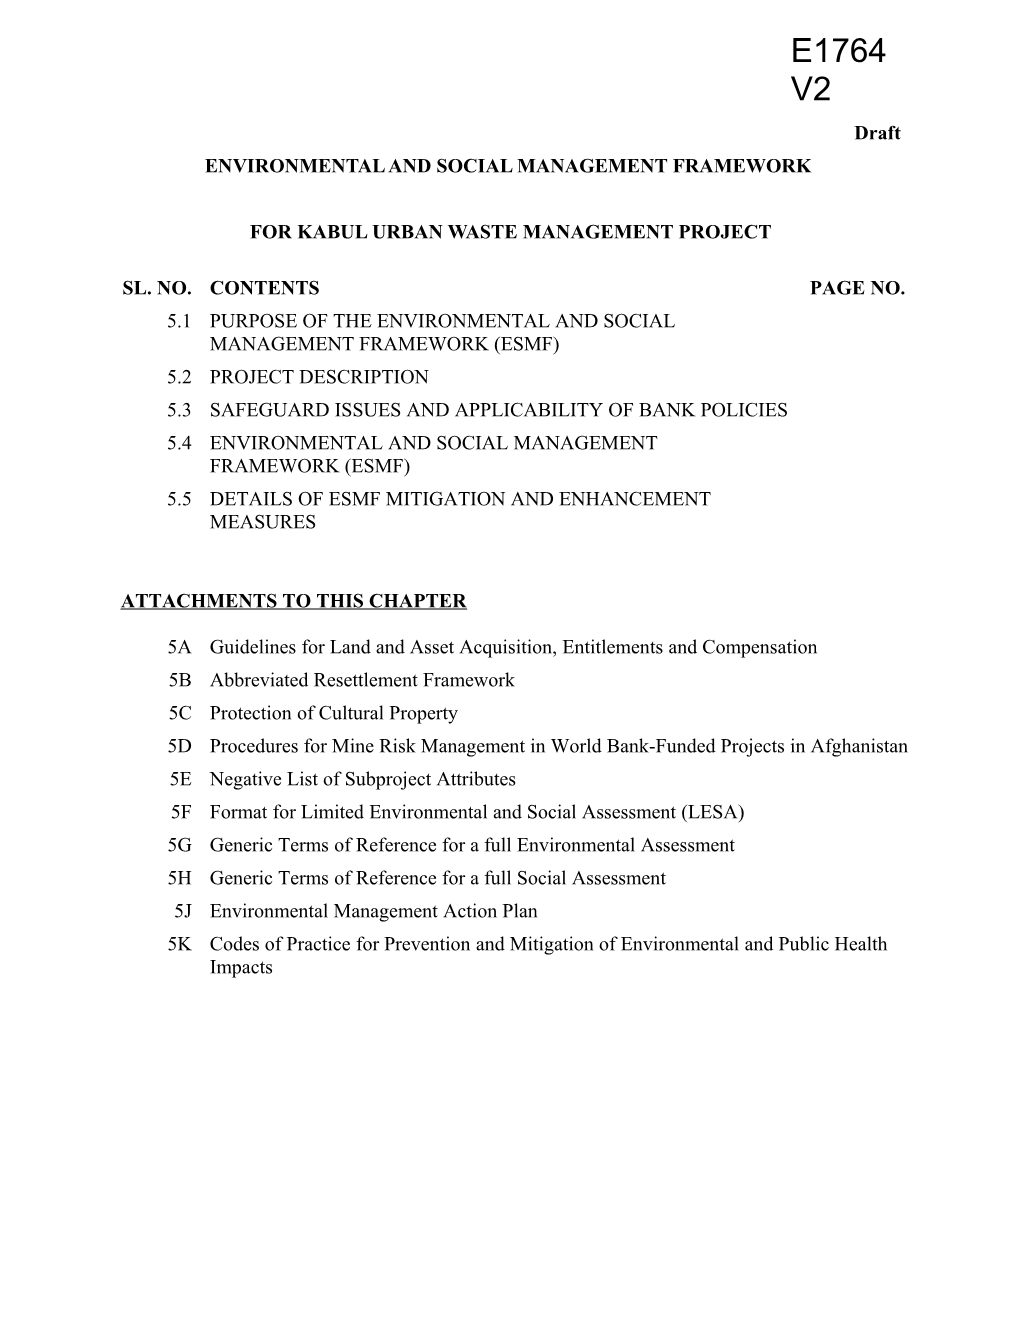 Annex 6: Summary of the Environmental and Social and Environmental Assessments and Management